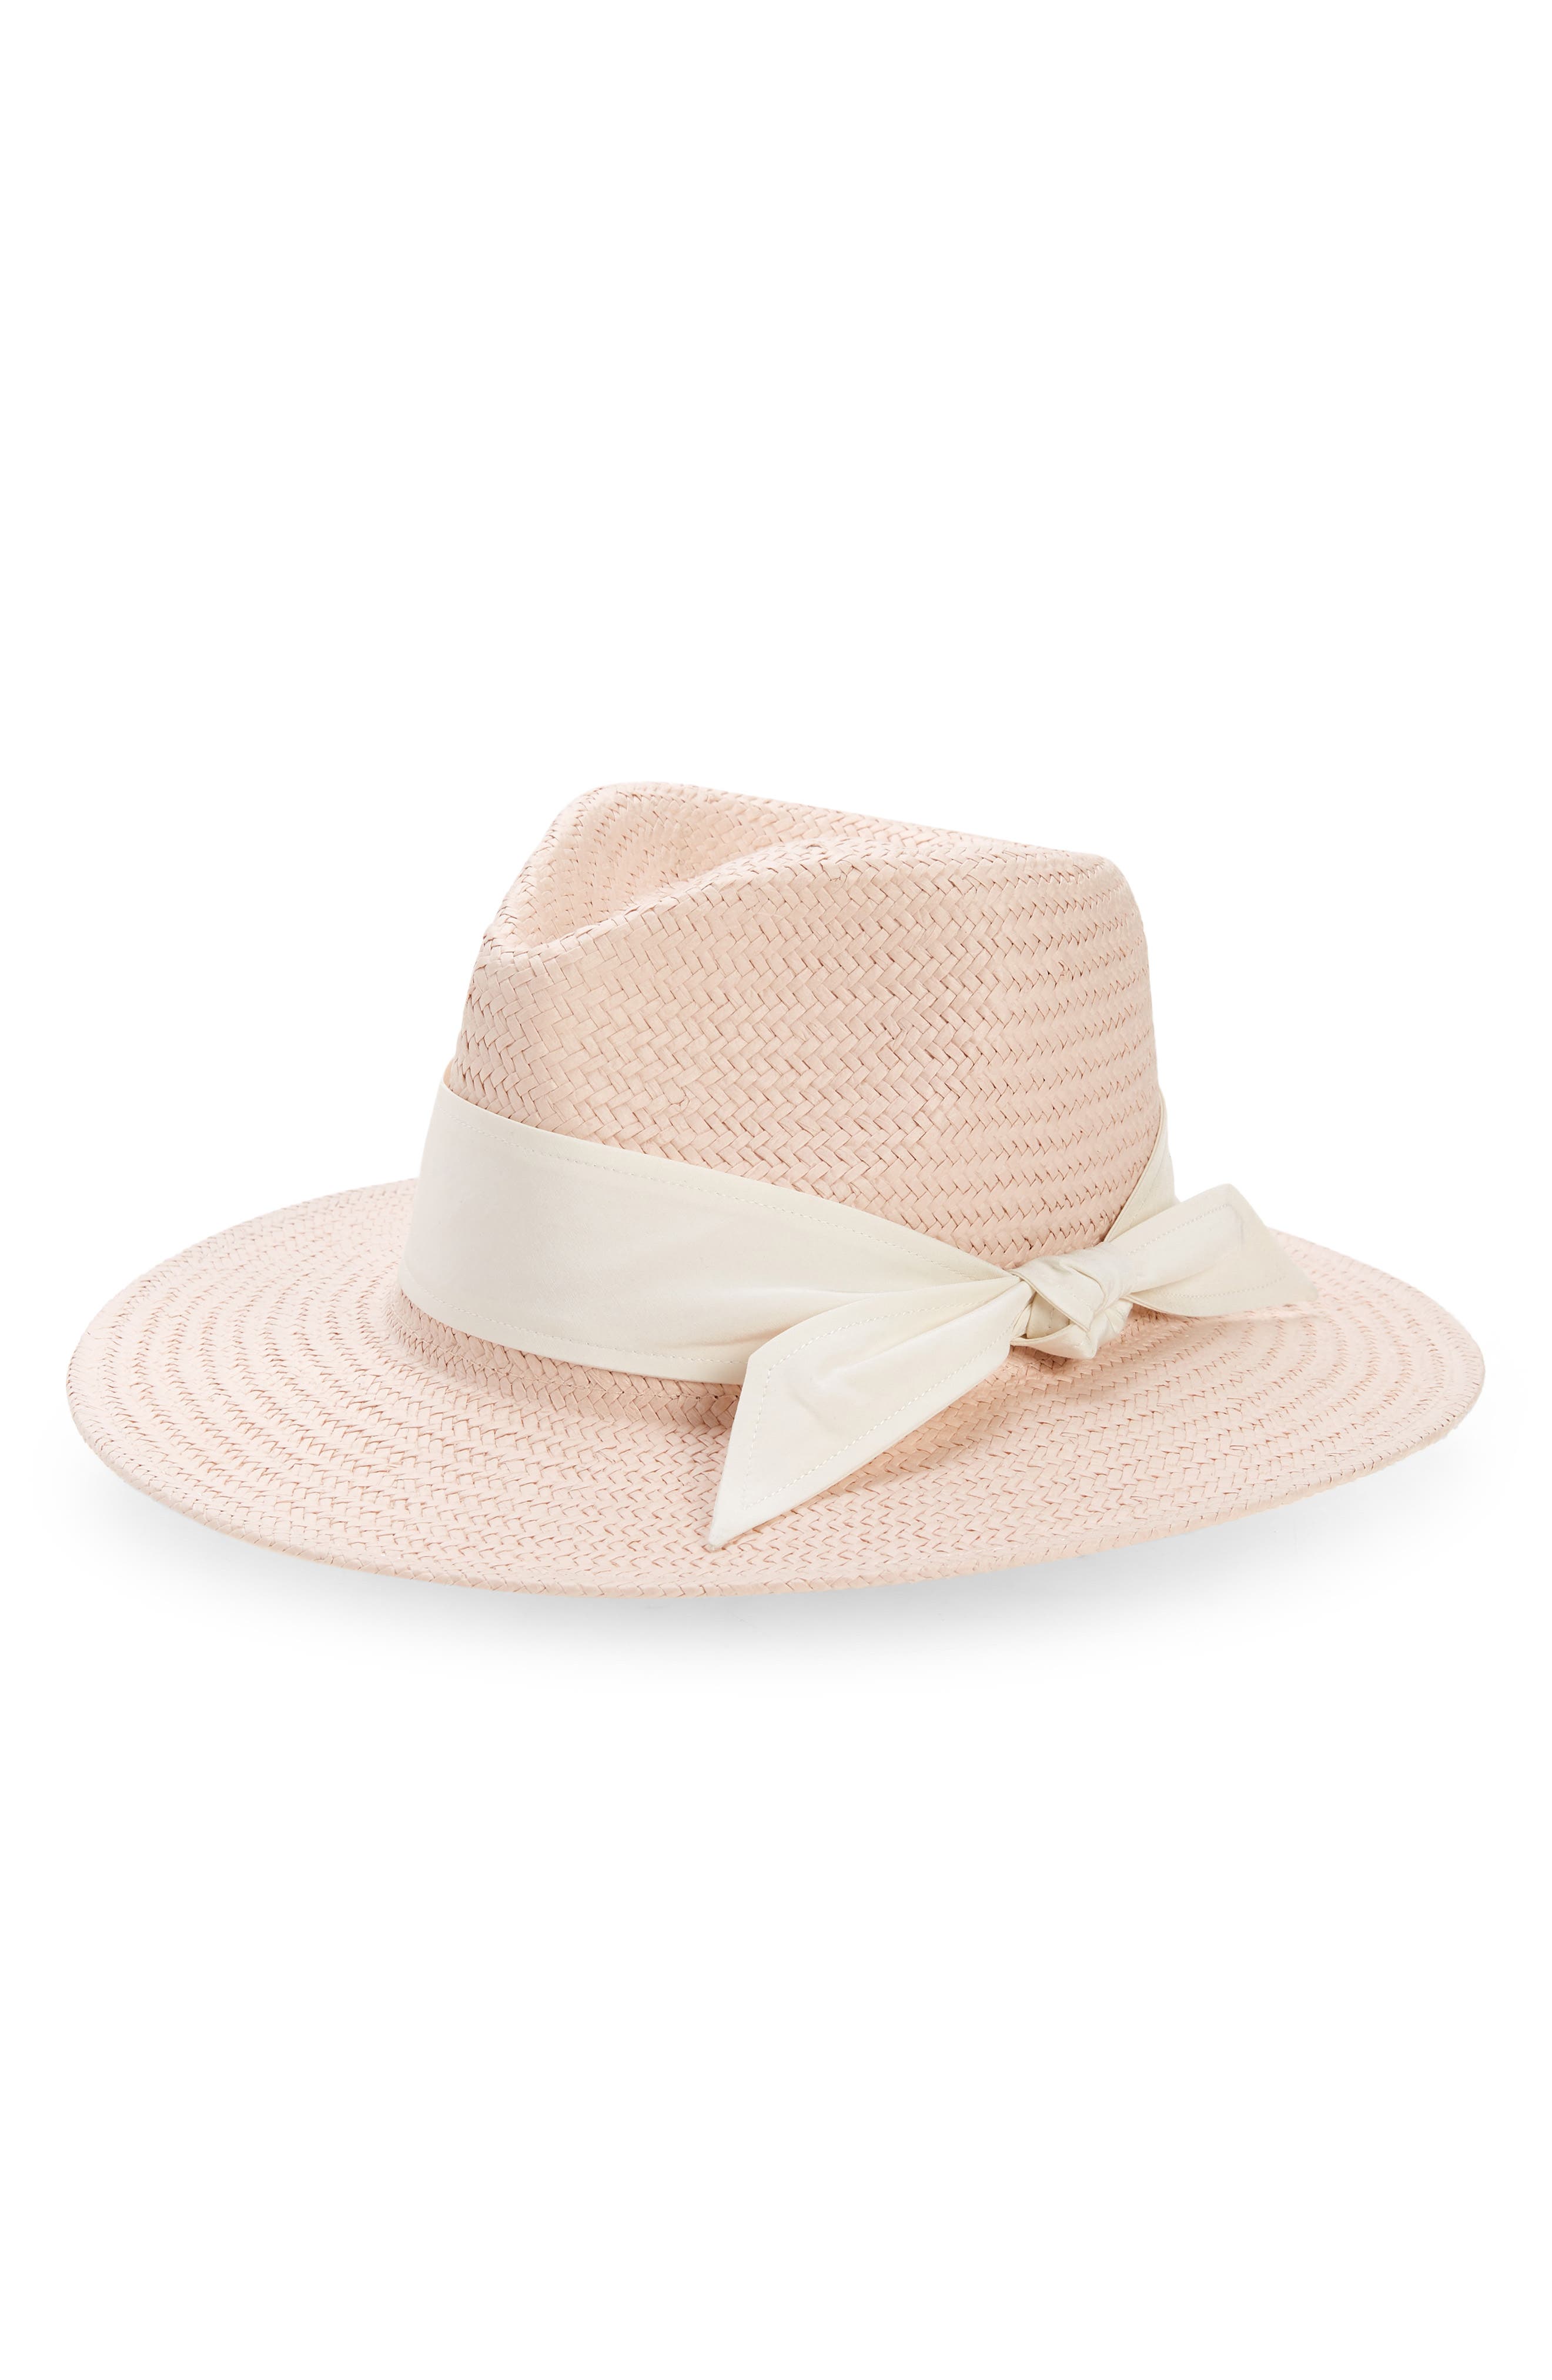 rag & bone Packable Straw Fedora Hat in Blush at Nordstrom, Size Large